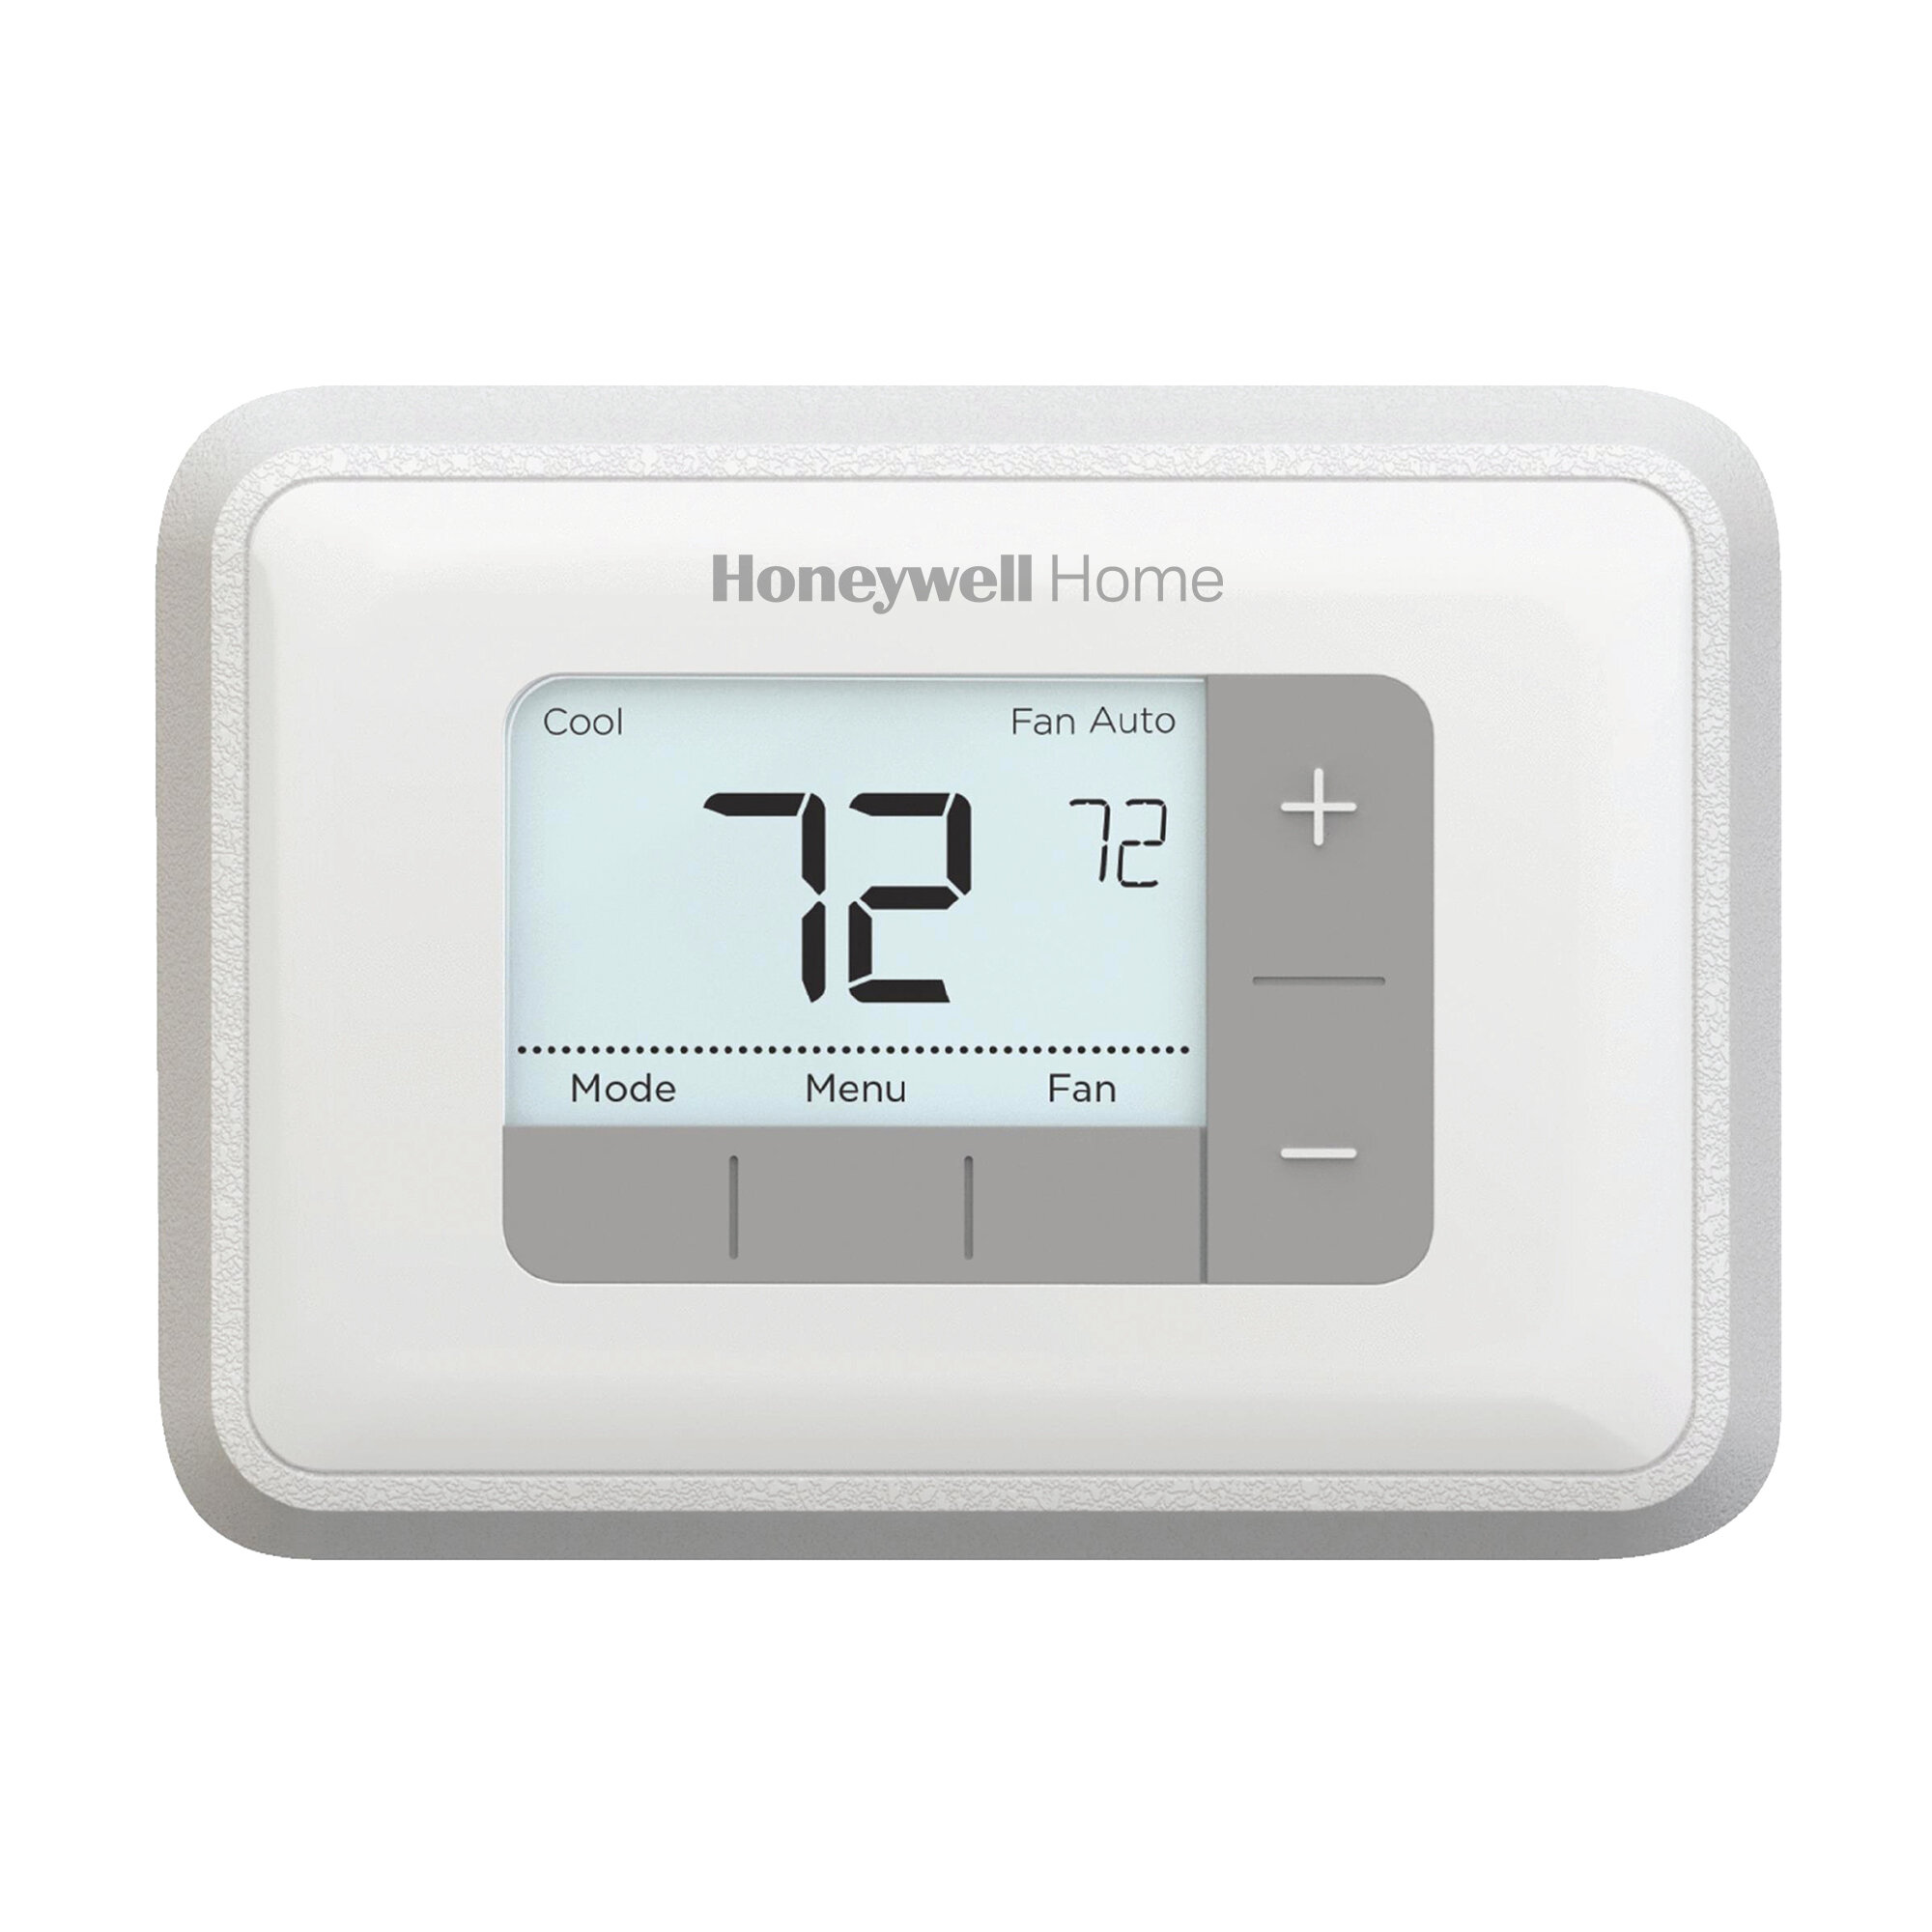 Ecoey Small Hygrometer Thermometer Humidity Meter Digital Monitor Sensor  Indoor with LCD Display